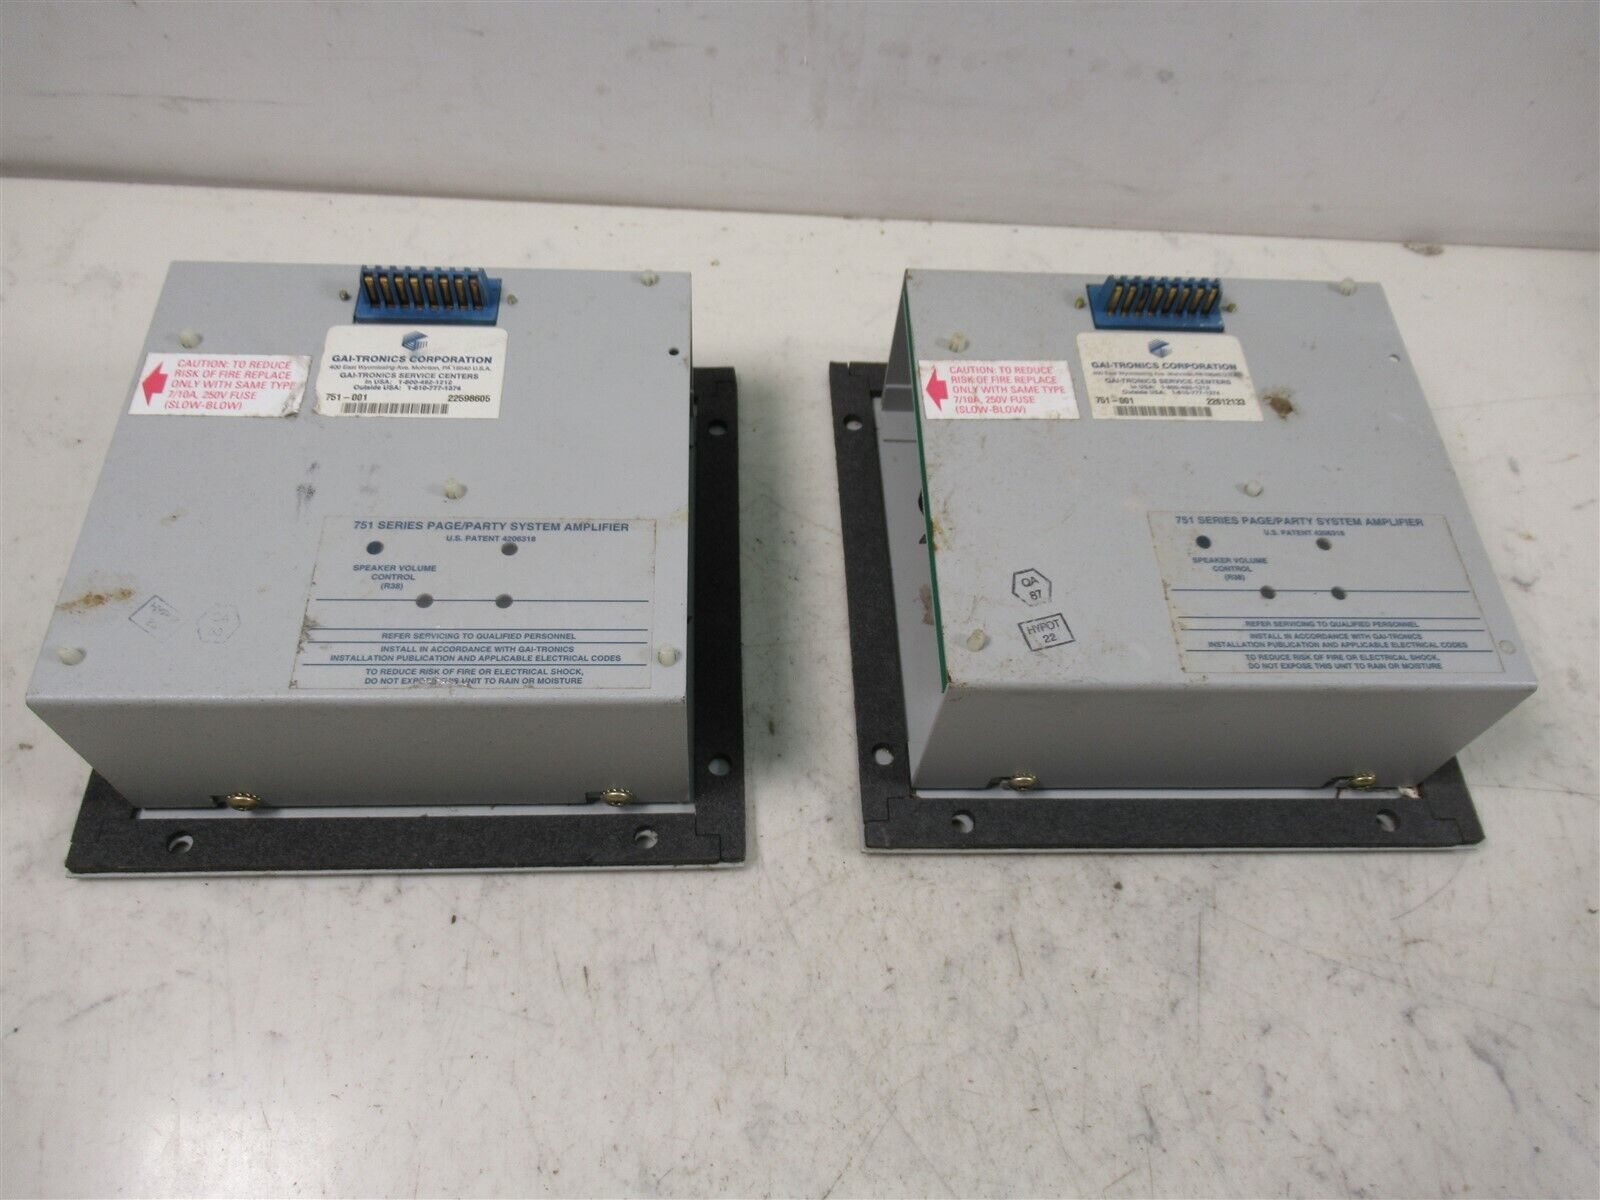 Lot of 2 Gai-Tronics 751-001 Page Party System Speaker Amplifier Units